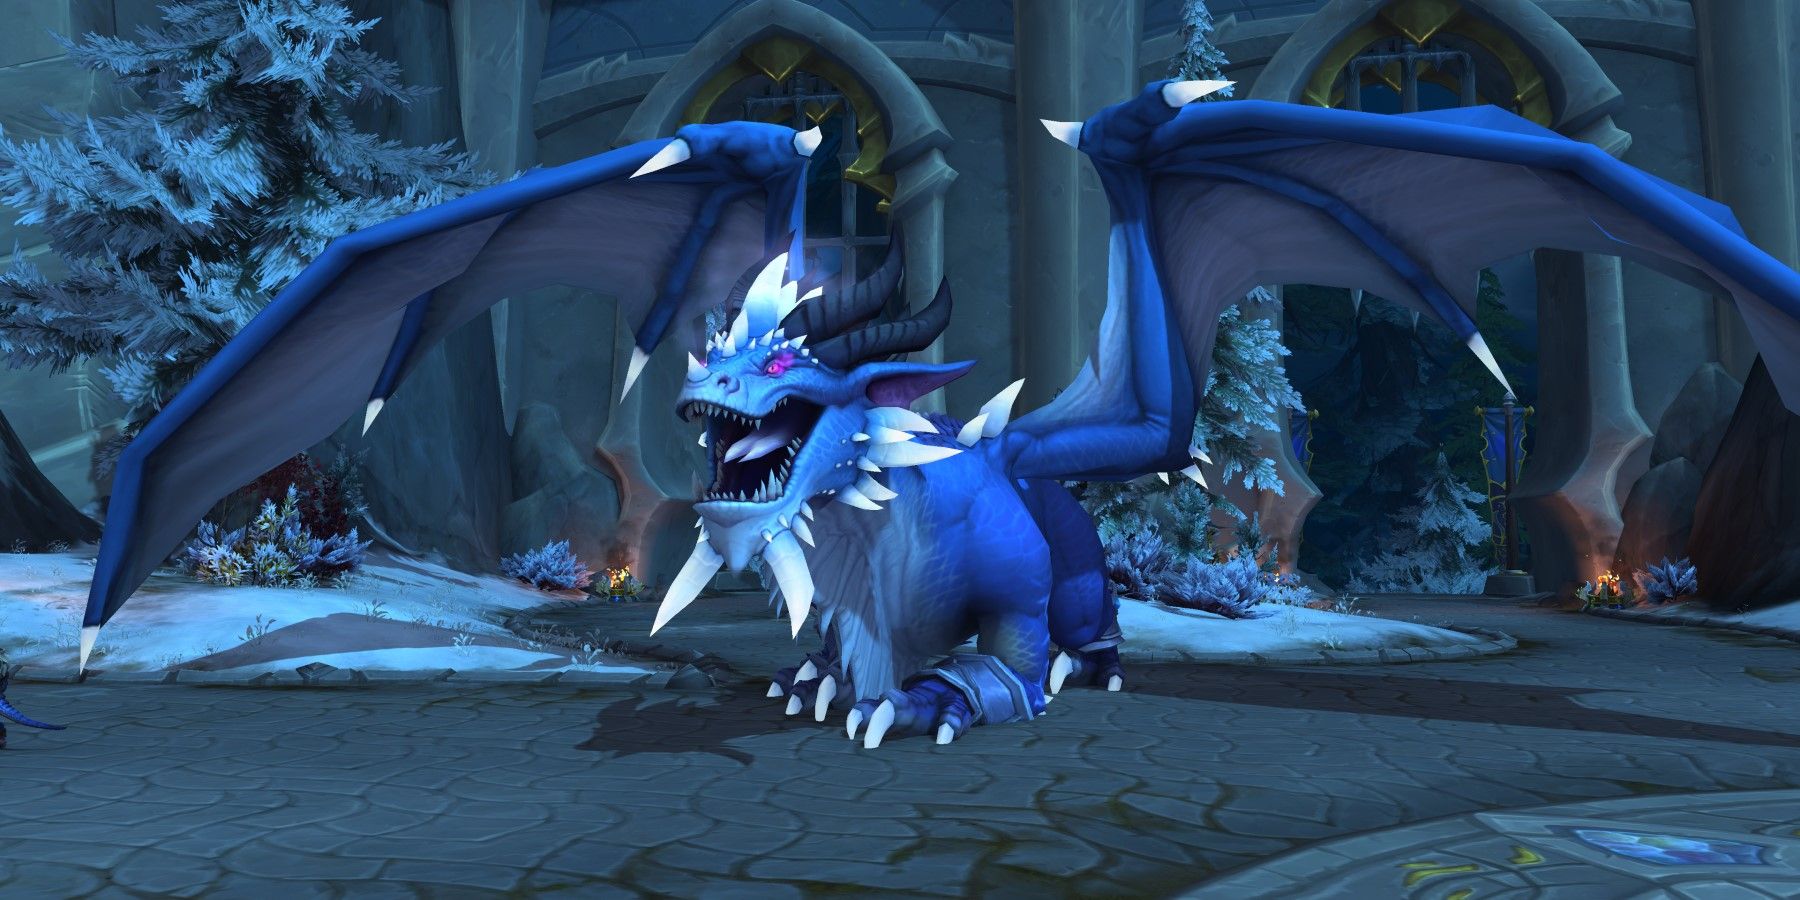 Drop Chances for MoP and WoD World Boss Mounts Greatly Increased - Wowhead  News